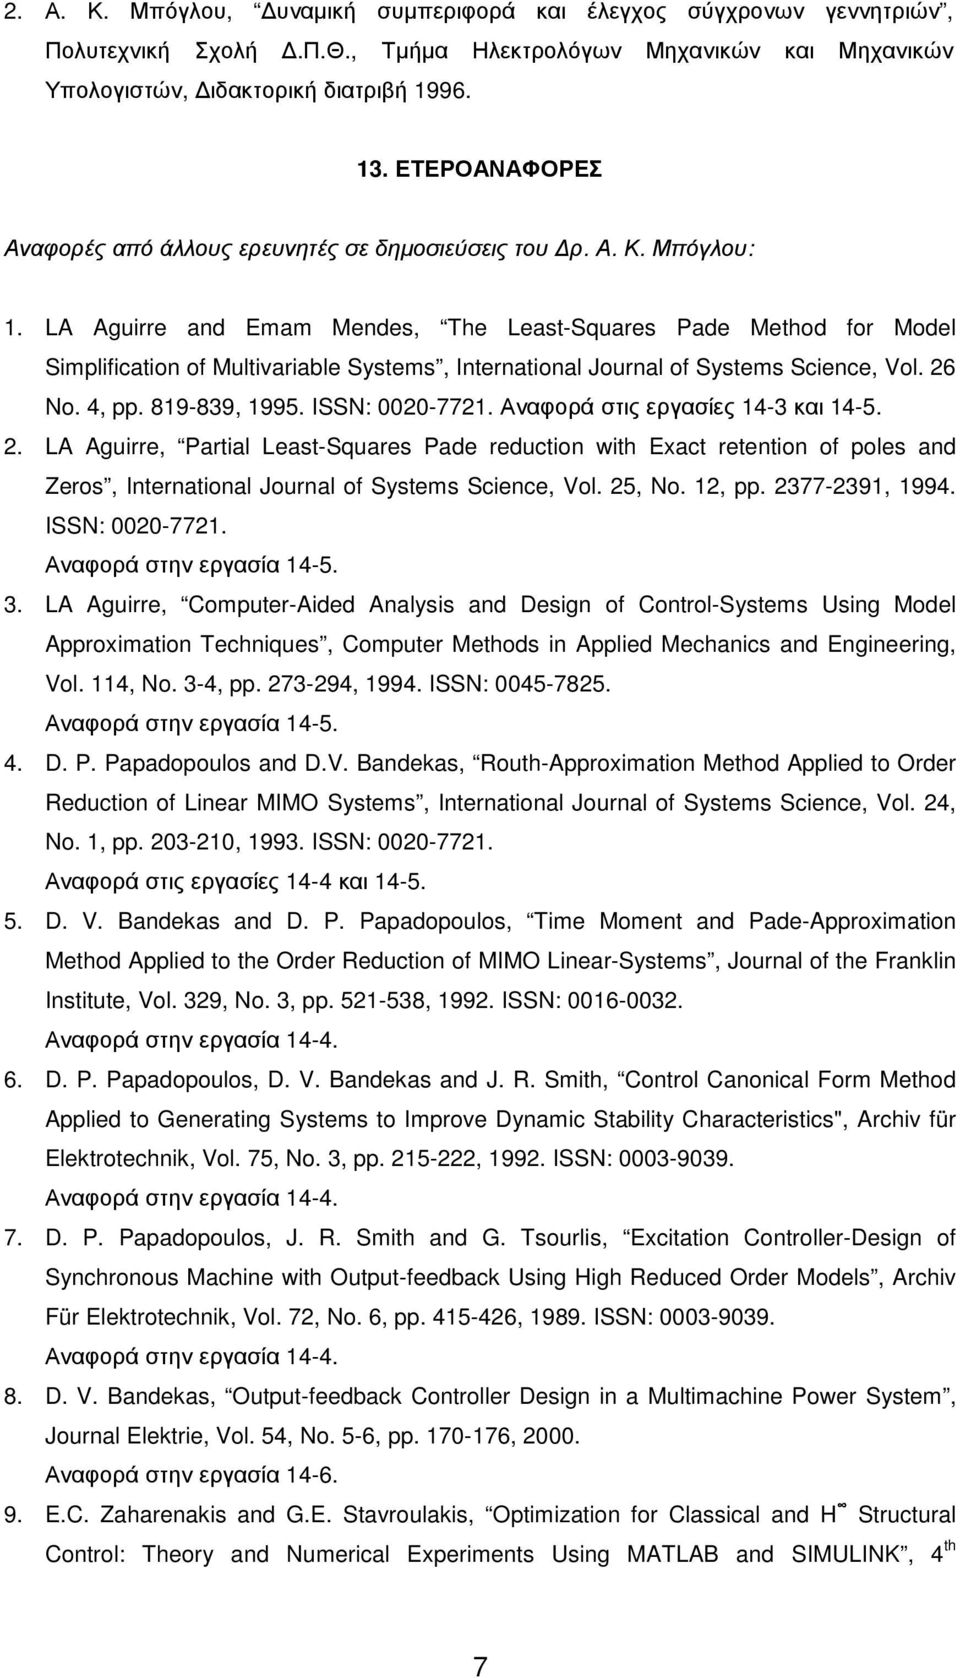 LA Aguirre and Emam Mendes, The Least-Squares Pade Method for Model Simplification of Multivariable Systems, International Journal of Systems Science, Vol. 26 No. 4, pp. 819-839, 1995.